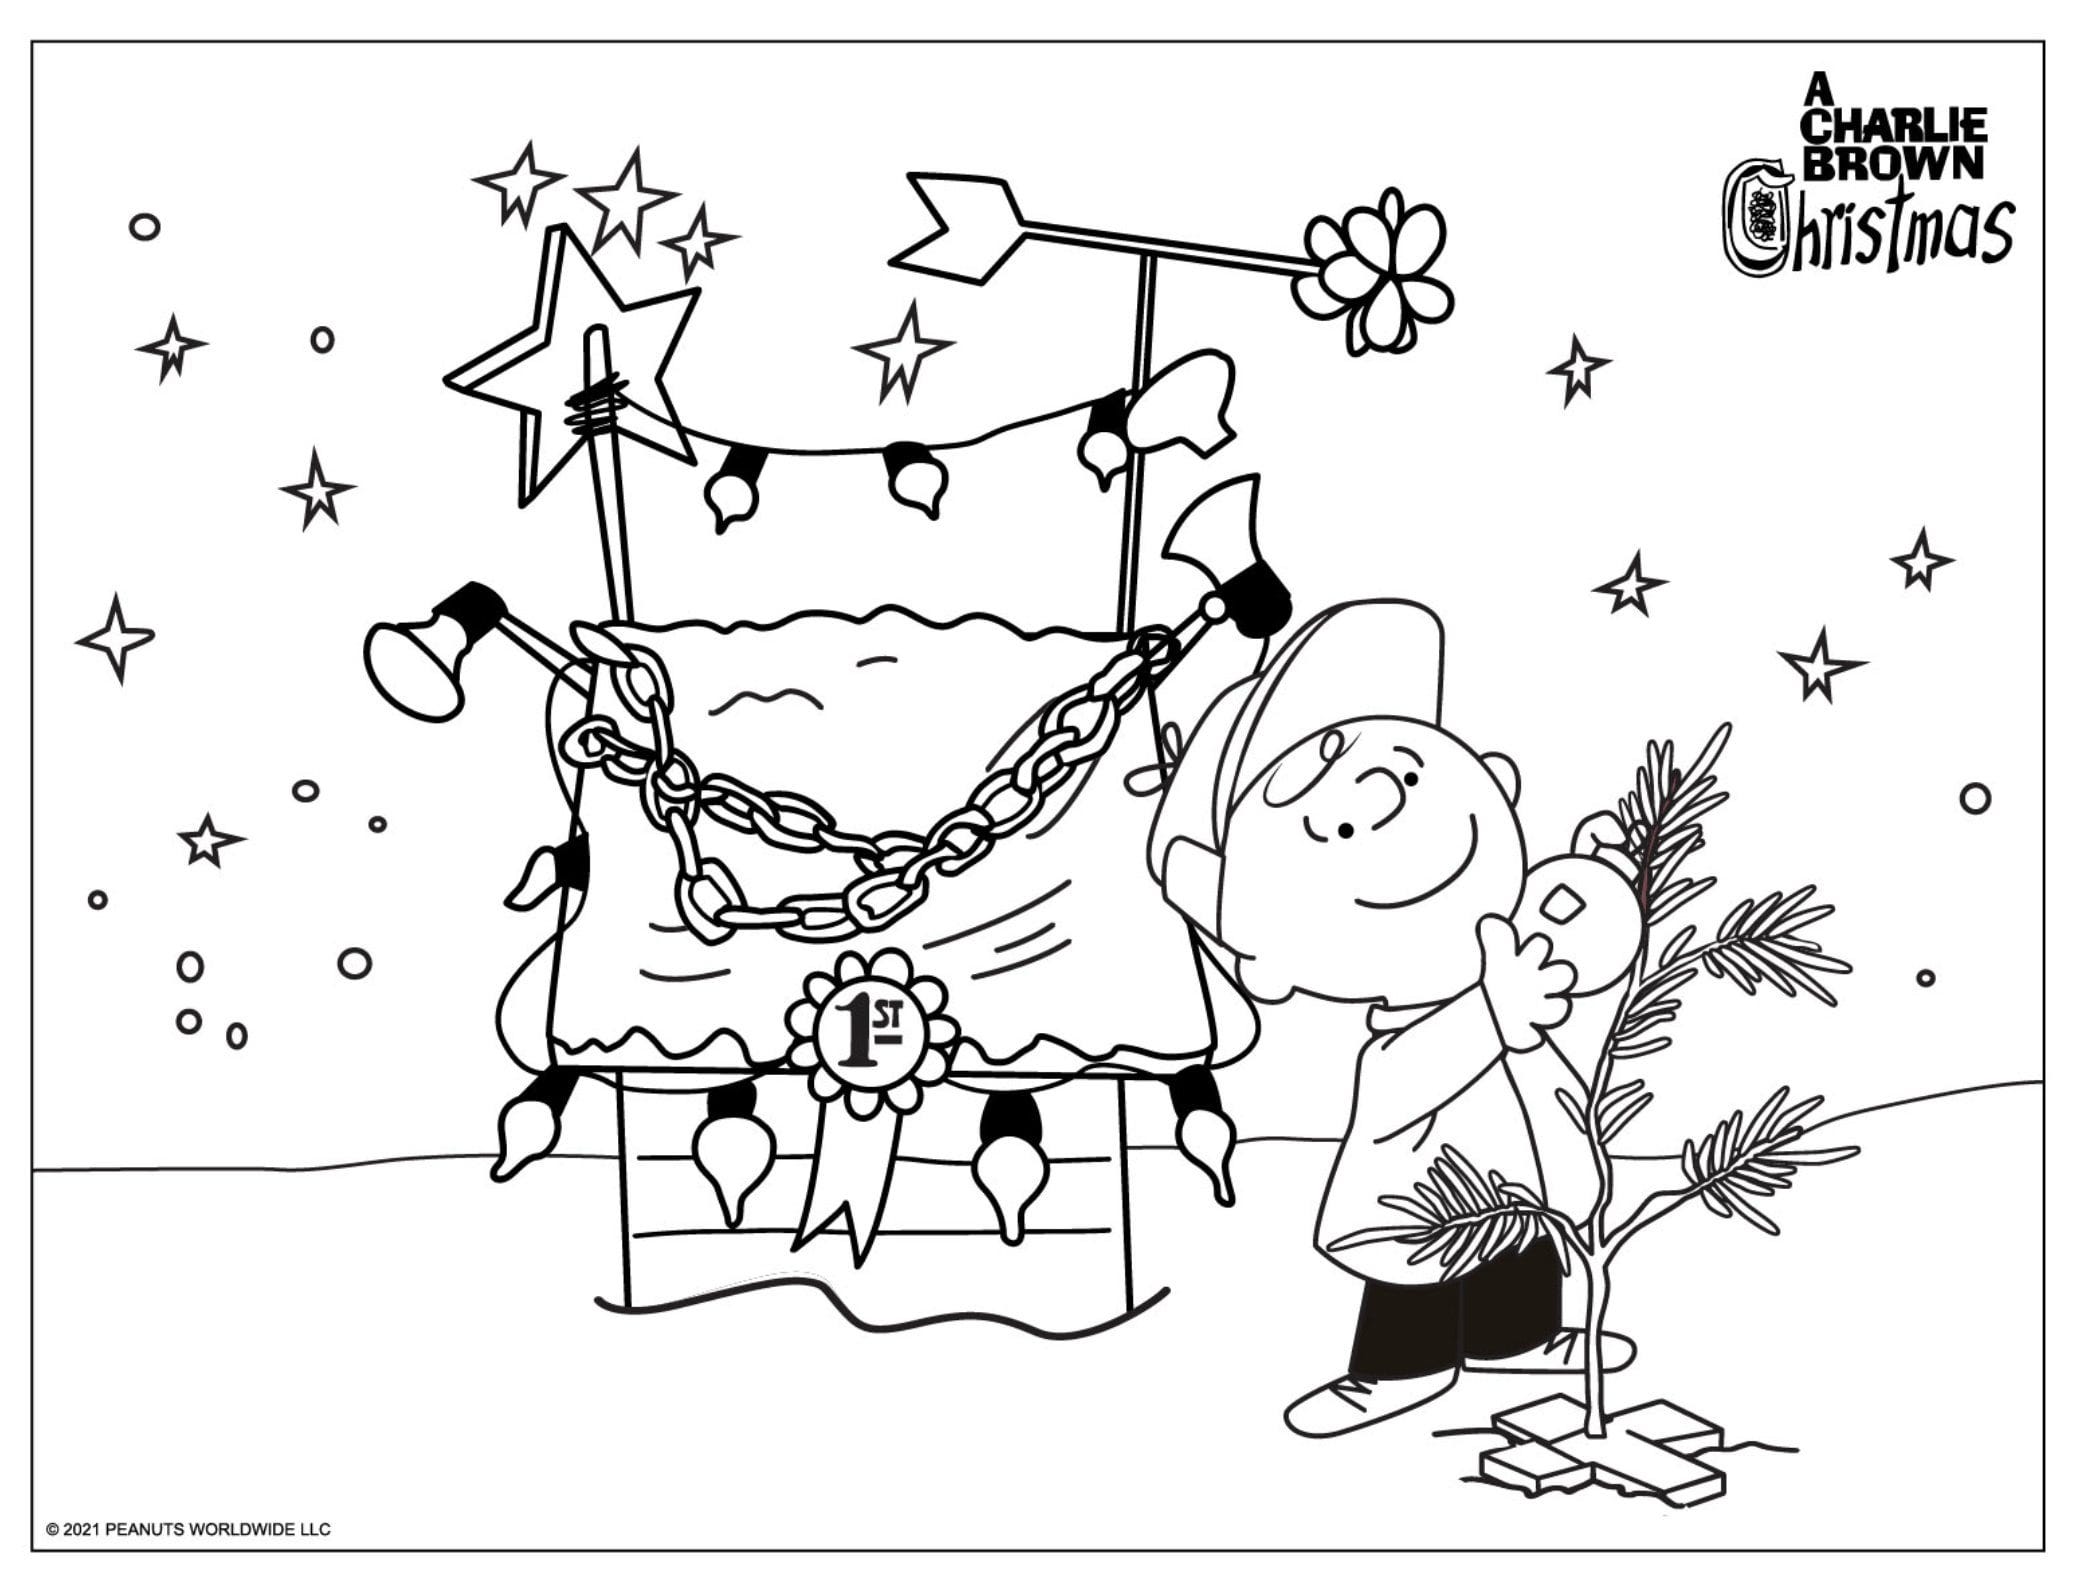 Peanuts - Charlie Brown Holiday Coloring Pages - Peanuts Christmas Pages - Peanuts Thanksgiving Pages - Peanuts Easter - Peanuts Valentines